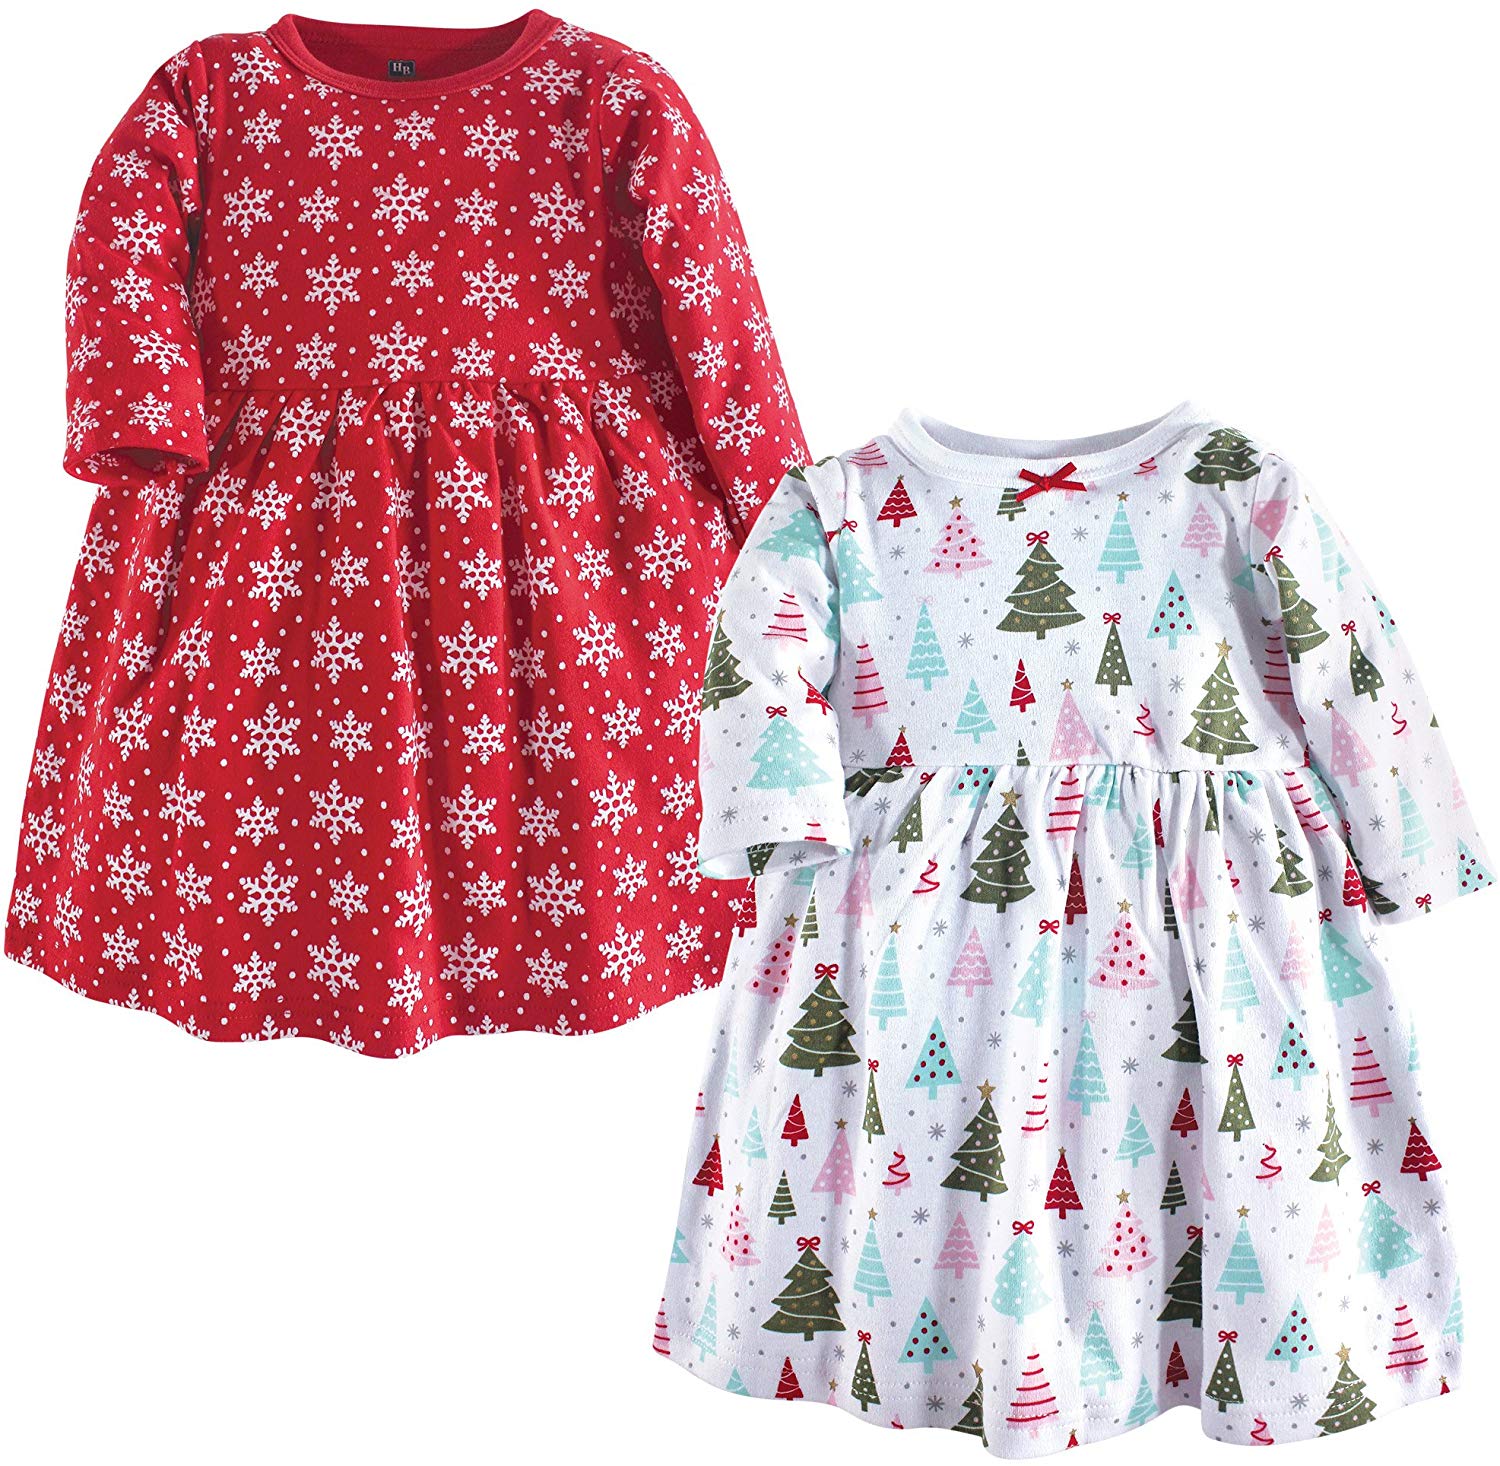 Hudson Baby Toddler and Baby Girl Cotton Dresses